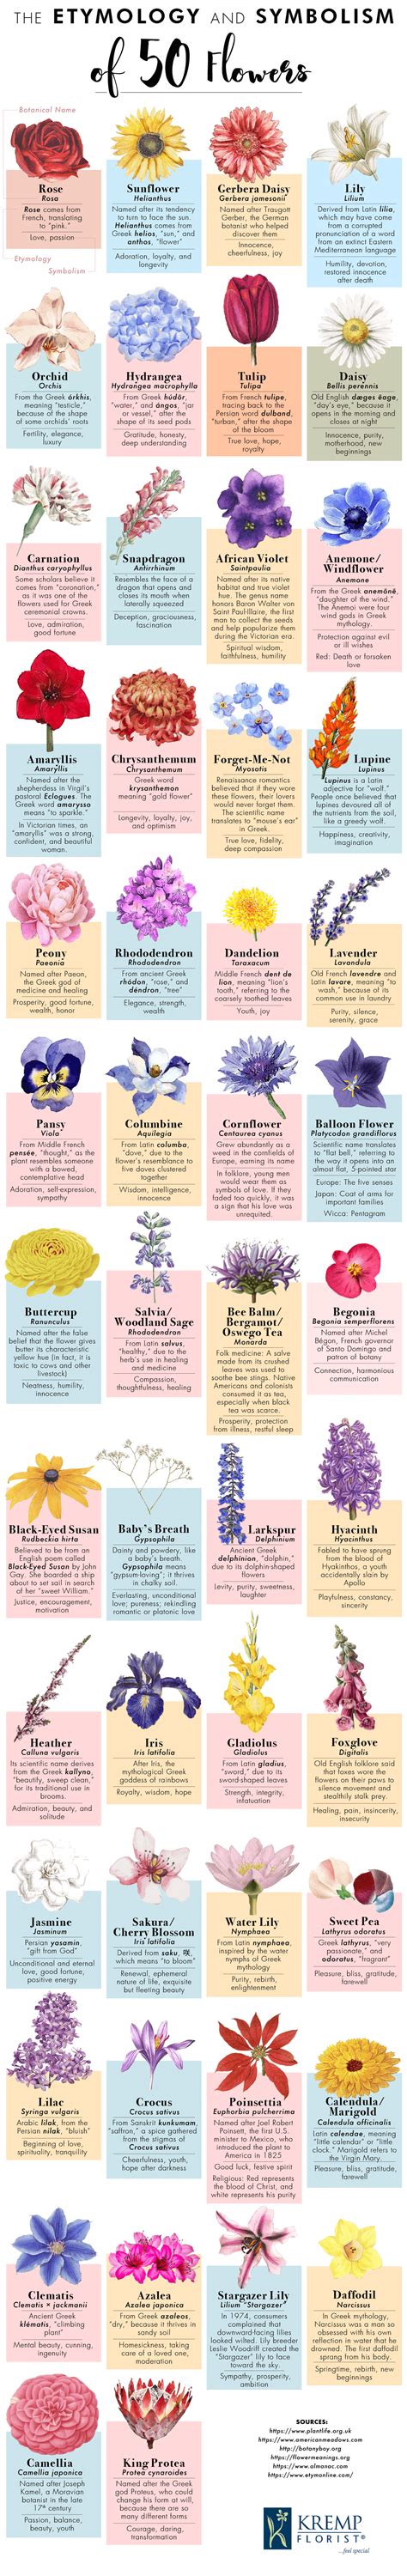 The Etymology And Symbolism Of 50 Flowers Pretty Flower Names